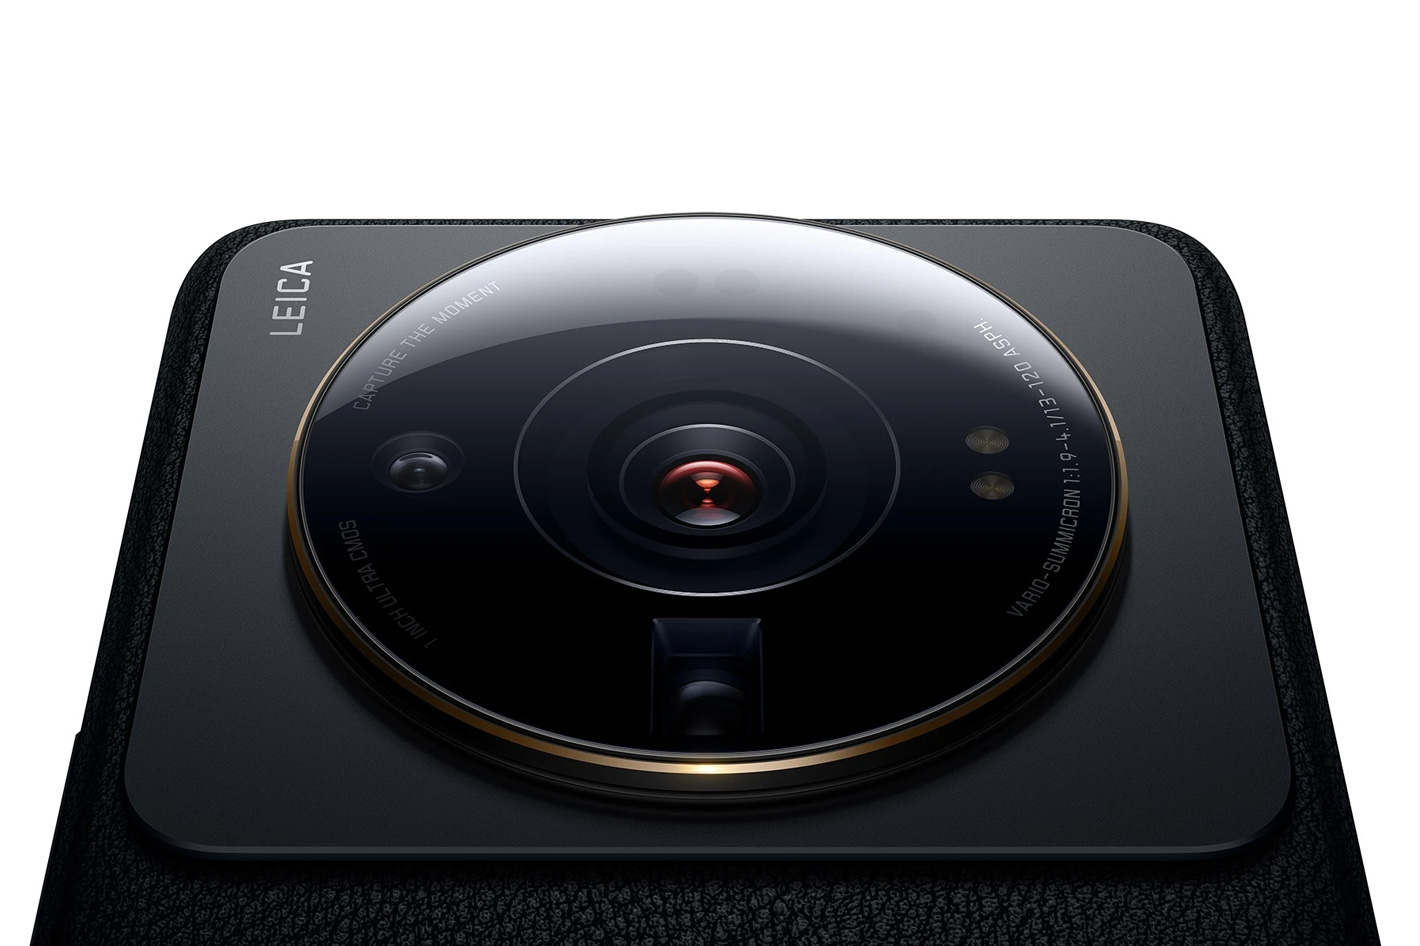 Xiaomi 12S Ultra: where is the Leica Vario-Summicron zoom? by Jose Antunes  - ProVideo Coalition